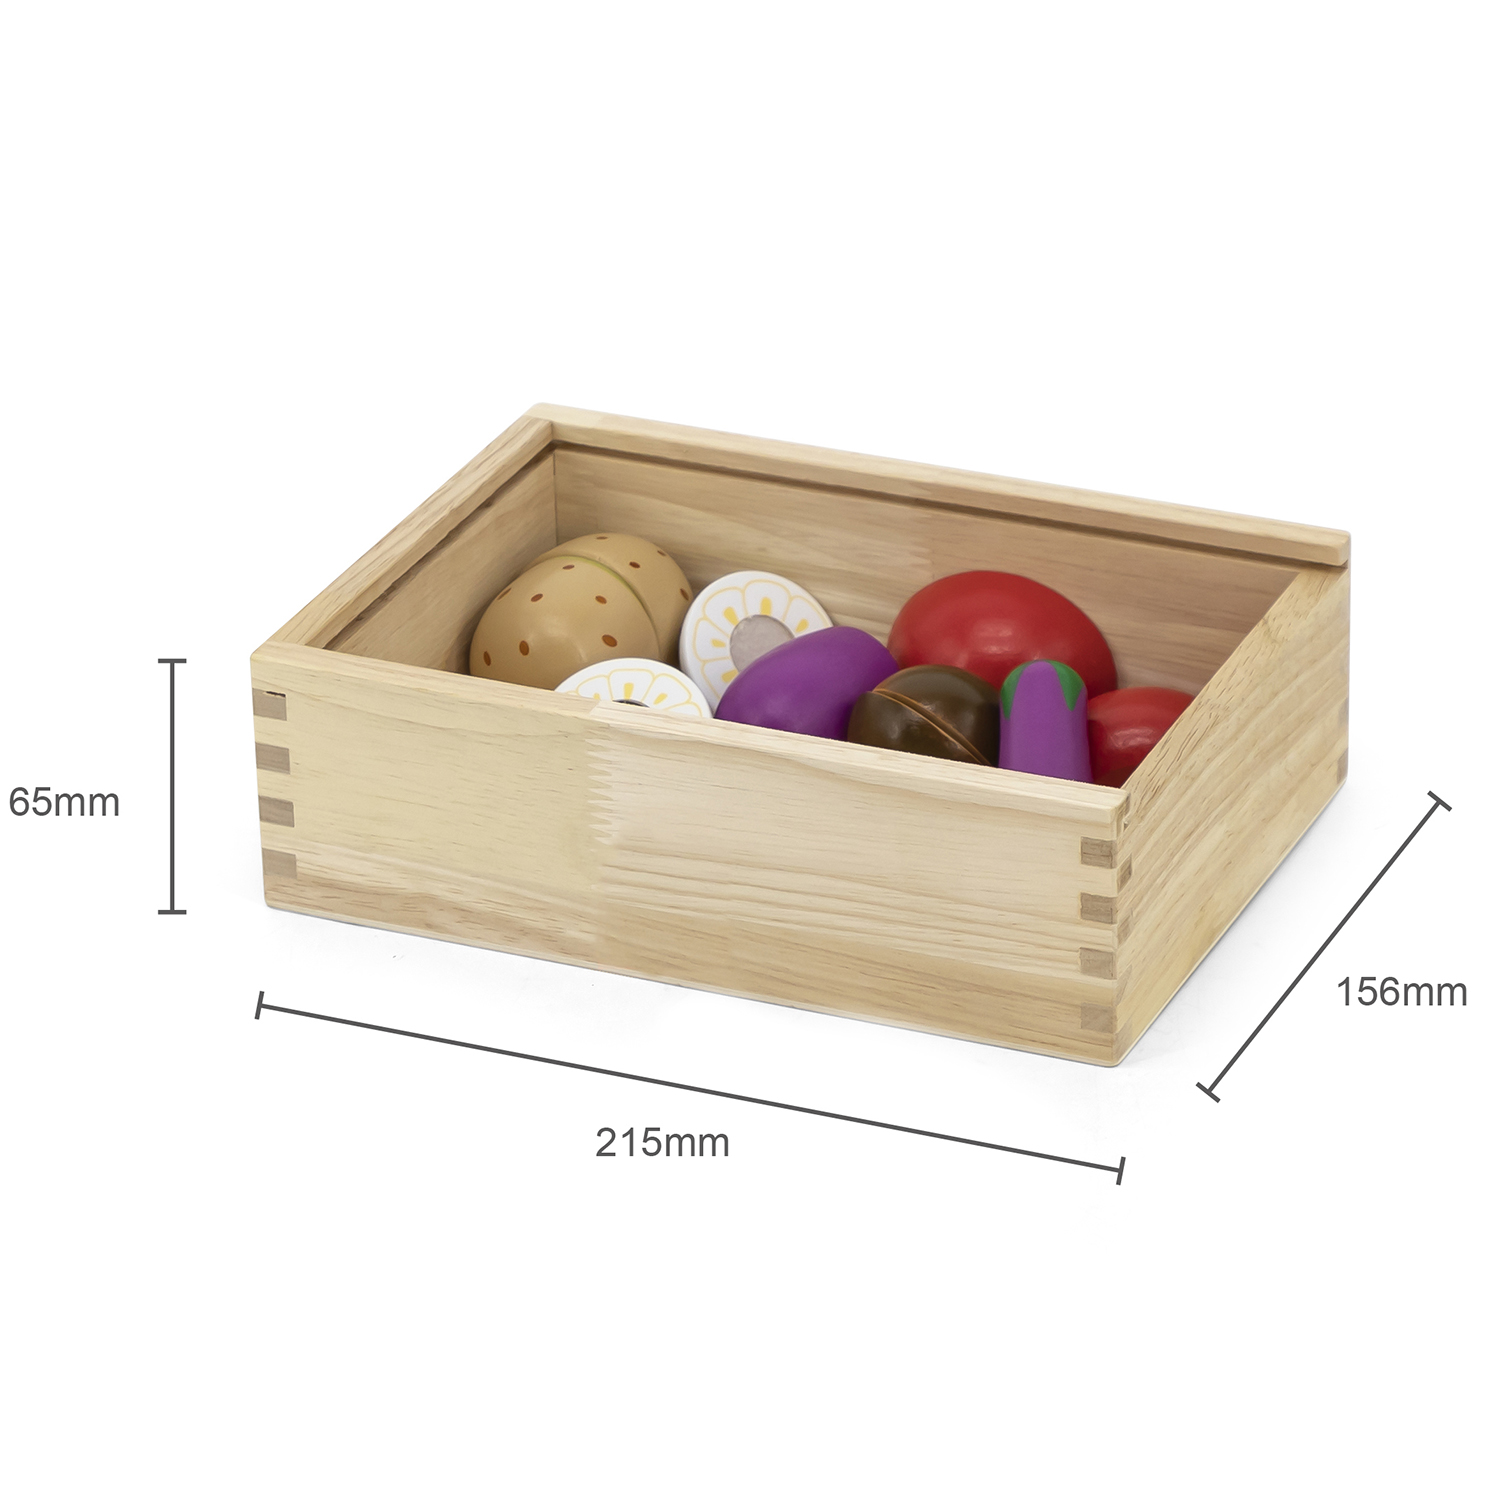 dimensions for cutting vegetables box